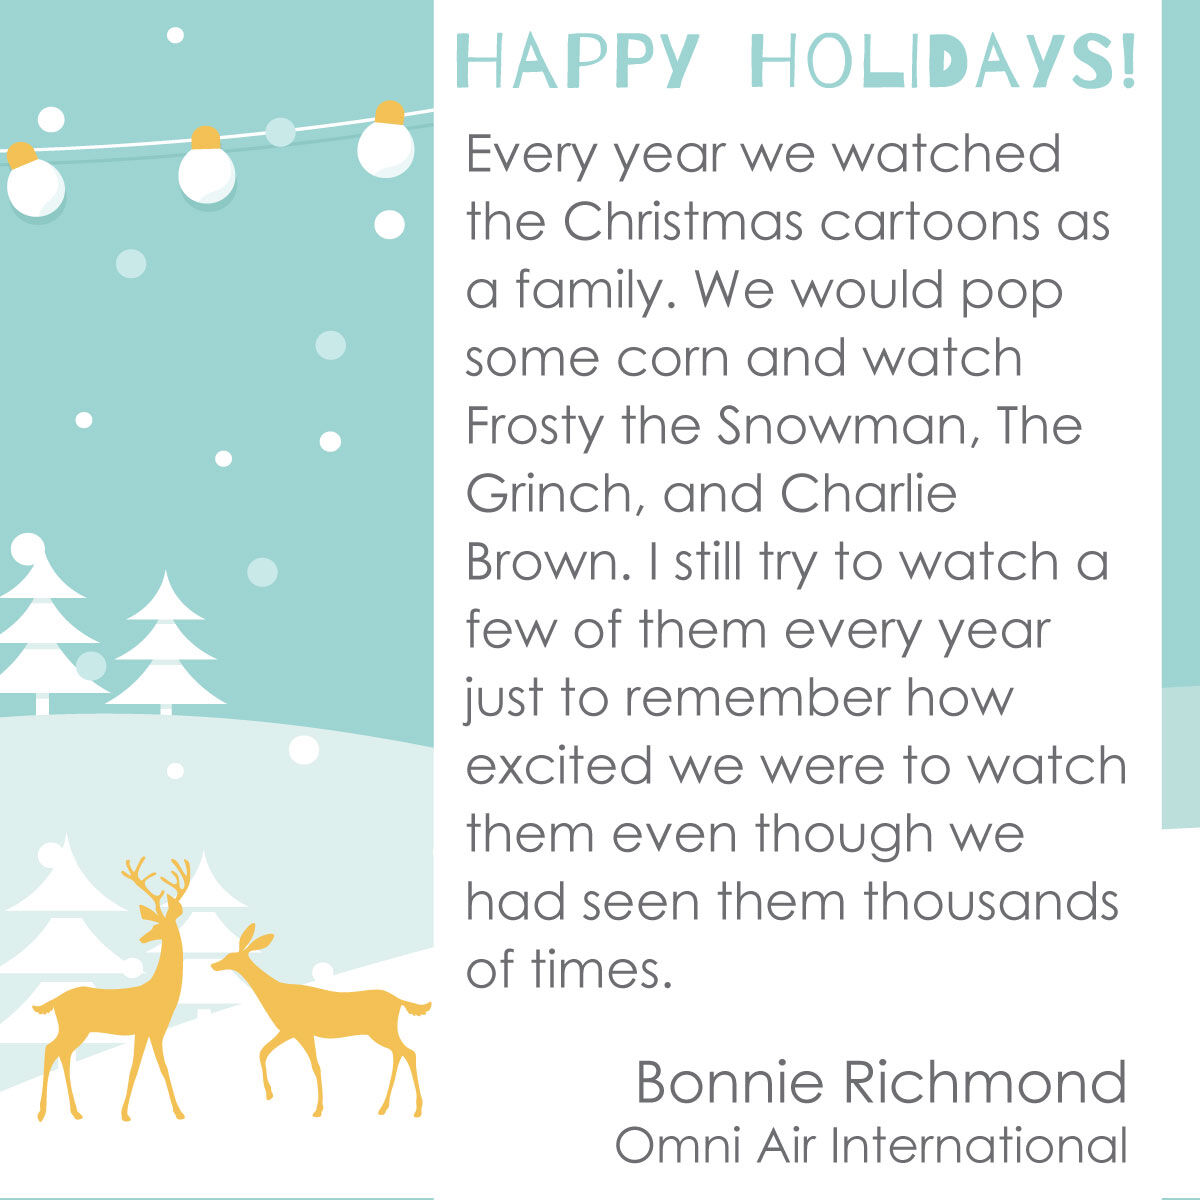 We asked our employees to share their favorite holiday memories and traditions. What is your favorite holiday movie? #holidays #memories